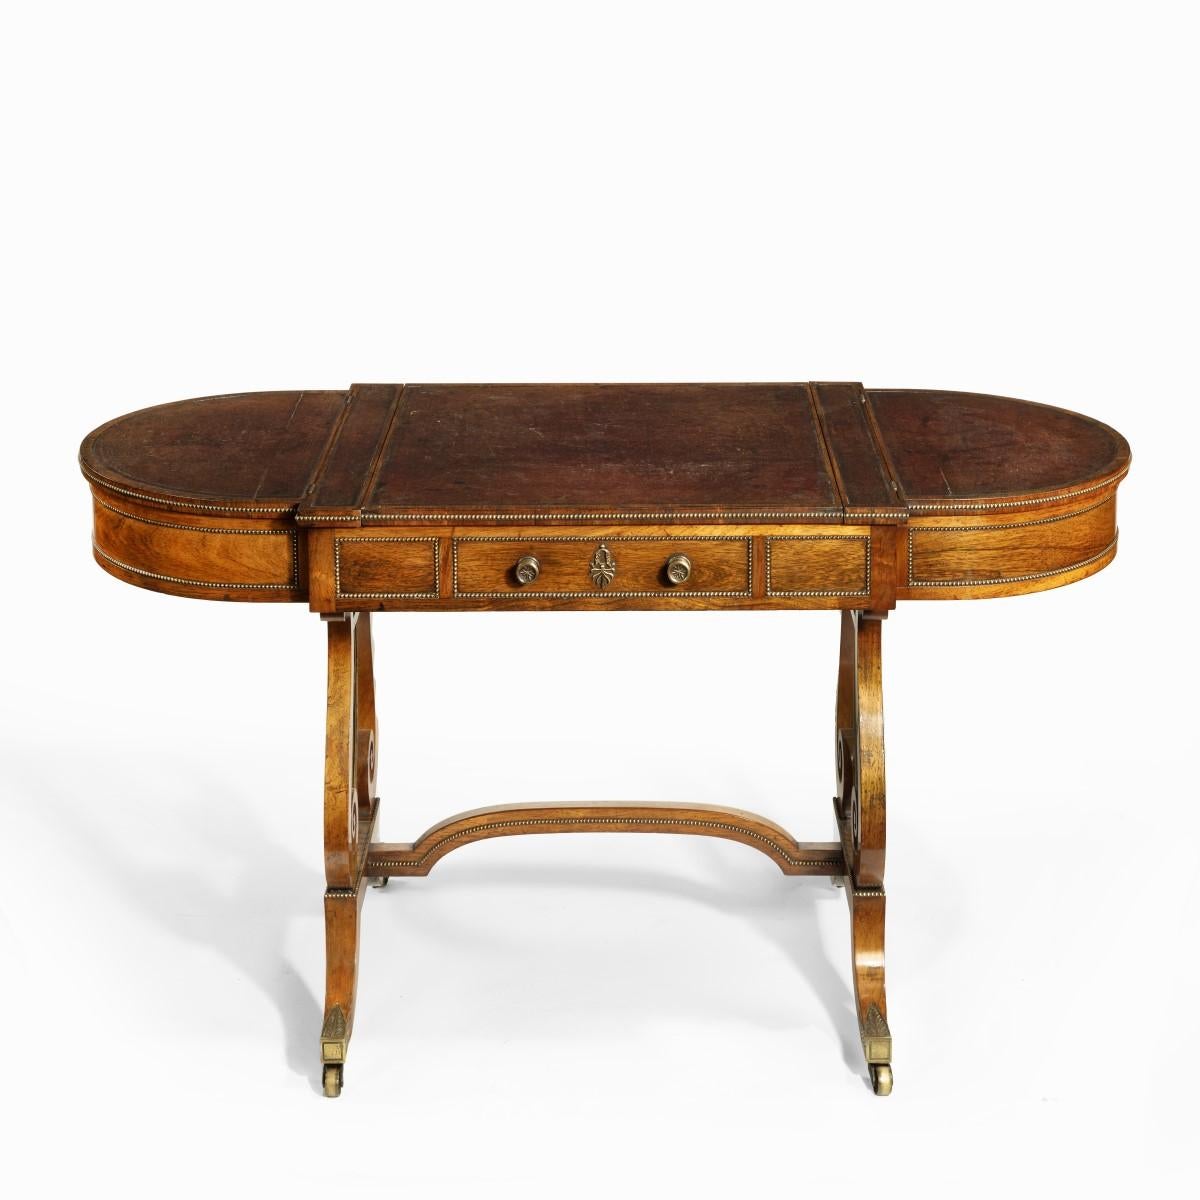 19th Century Regency Period Rosewood Sofa Games Table Attributed to Gillows of Lancaster For Sale